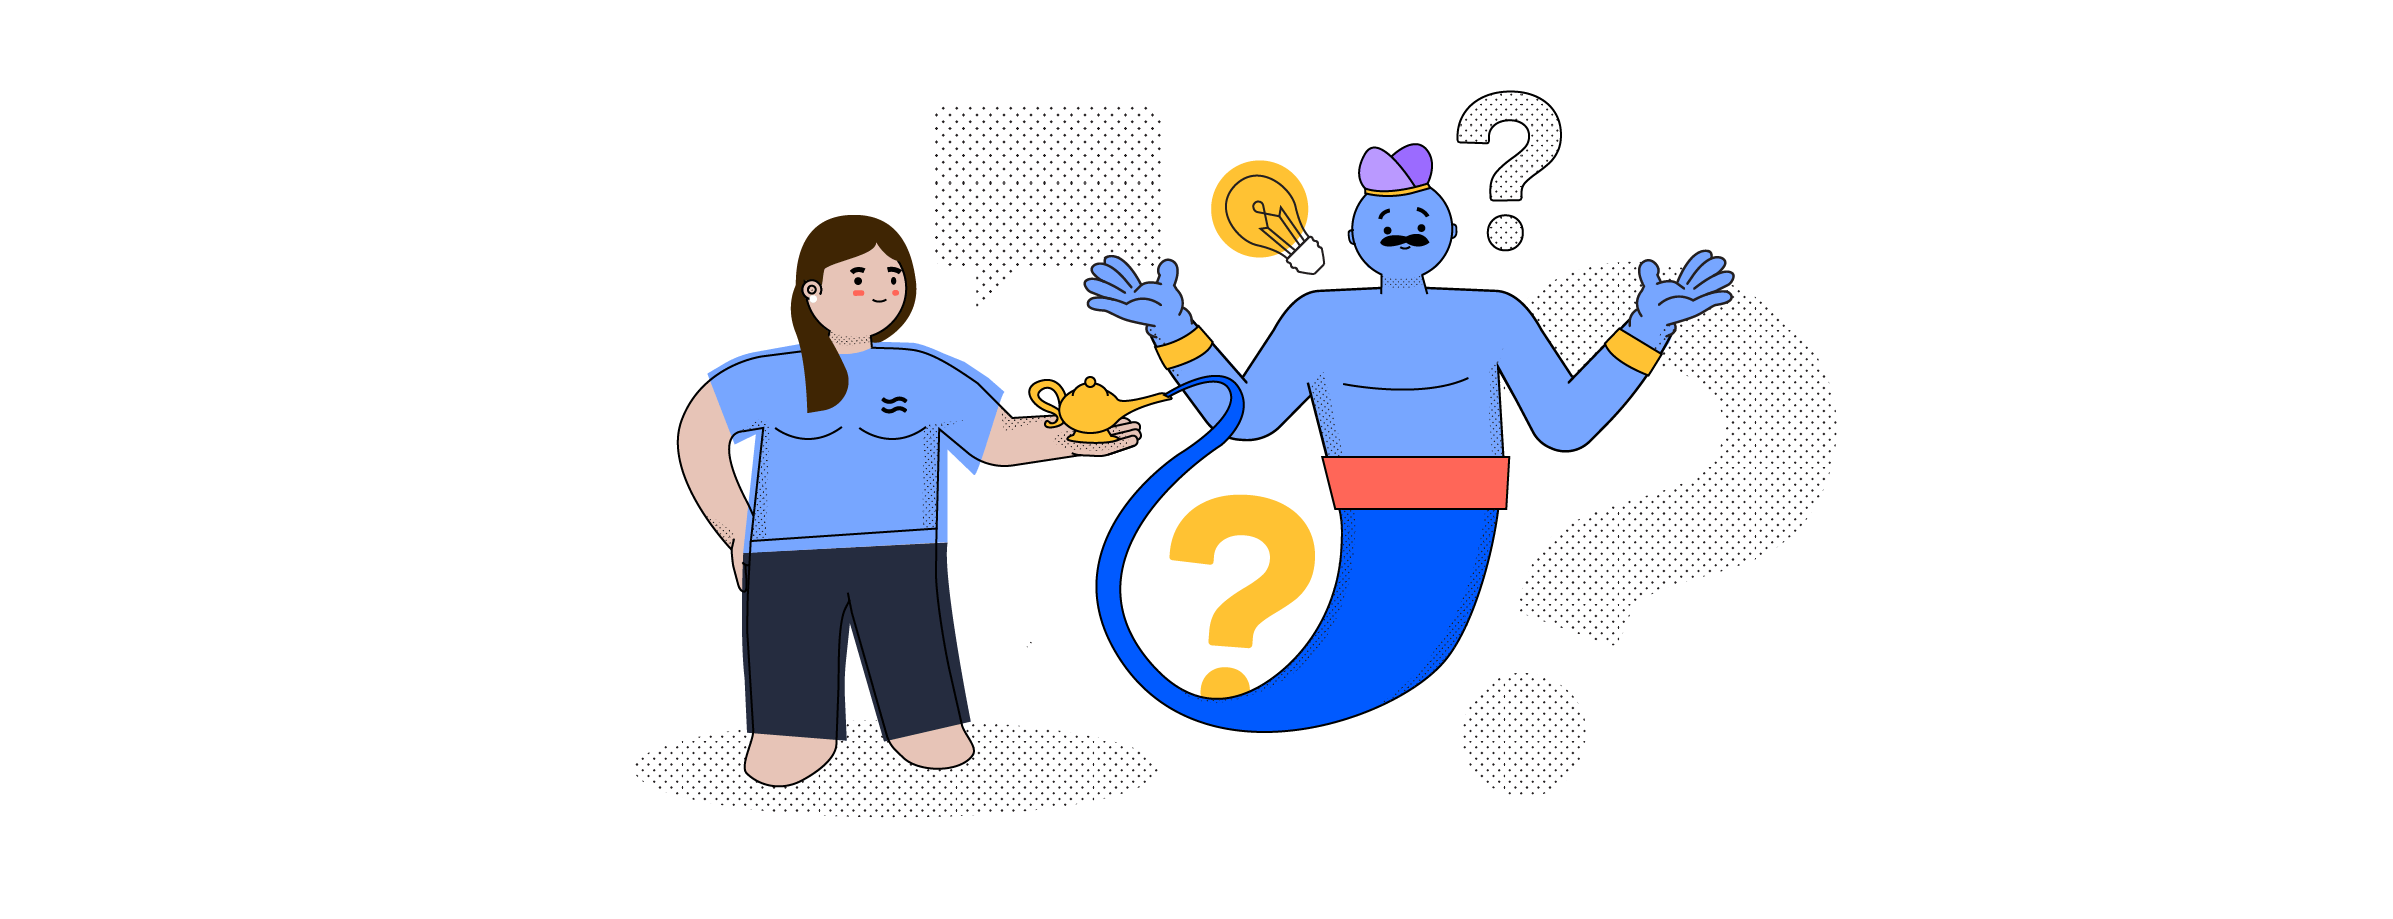 The Airtame team getting expertise from a genie as part of the hardware community project